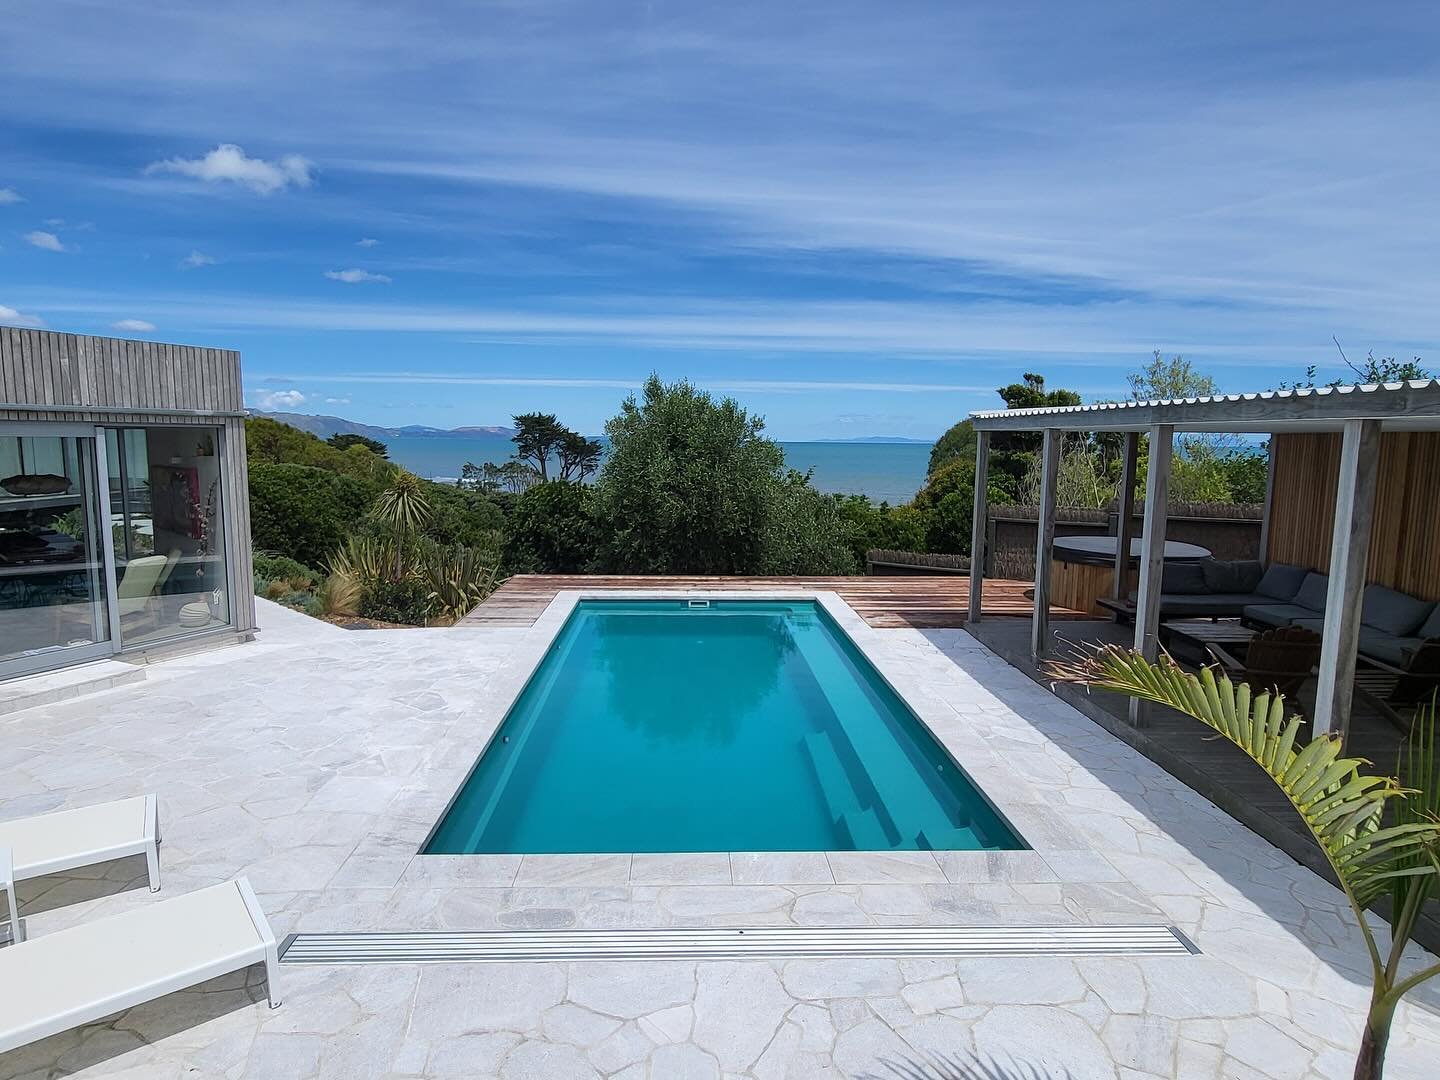 W H I T E  Q U A R T Z I T E - F L A M E D  F I N I S H

POOL COPING &amp; CRAZY PAVING

Beautiful pool install by Terri, Brent &amp; team @nz_pools . Surrounds completed by client using our White Quartzite Dropface coping in the 600x350 size along w